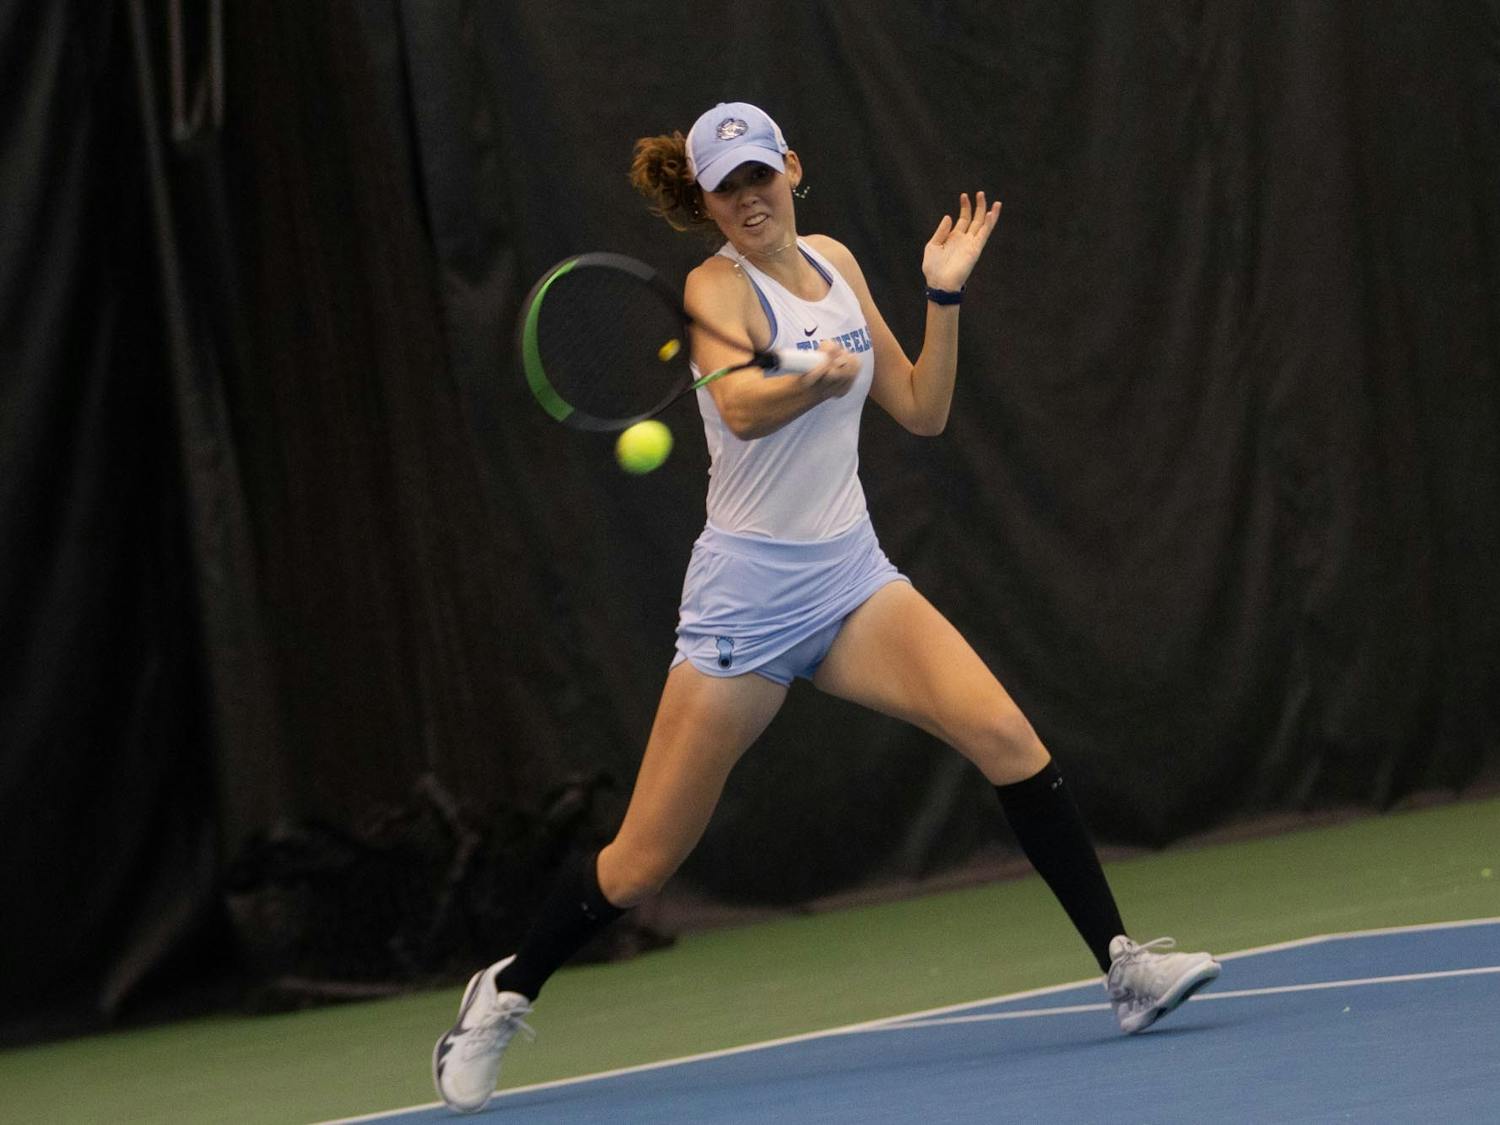 UNC junior Elizabeth Scotty strikes the ball against UNC Charlotte at the Cone-Kenfield Tennis Center Indoor Courts on Friday, Jan. 28, 2022. UNC won 4-0.